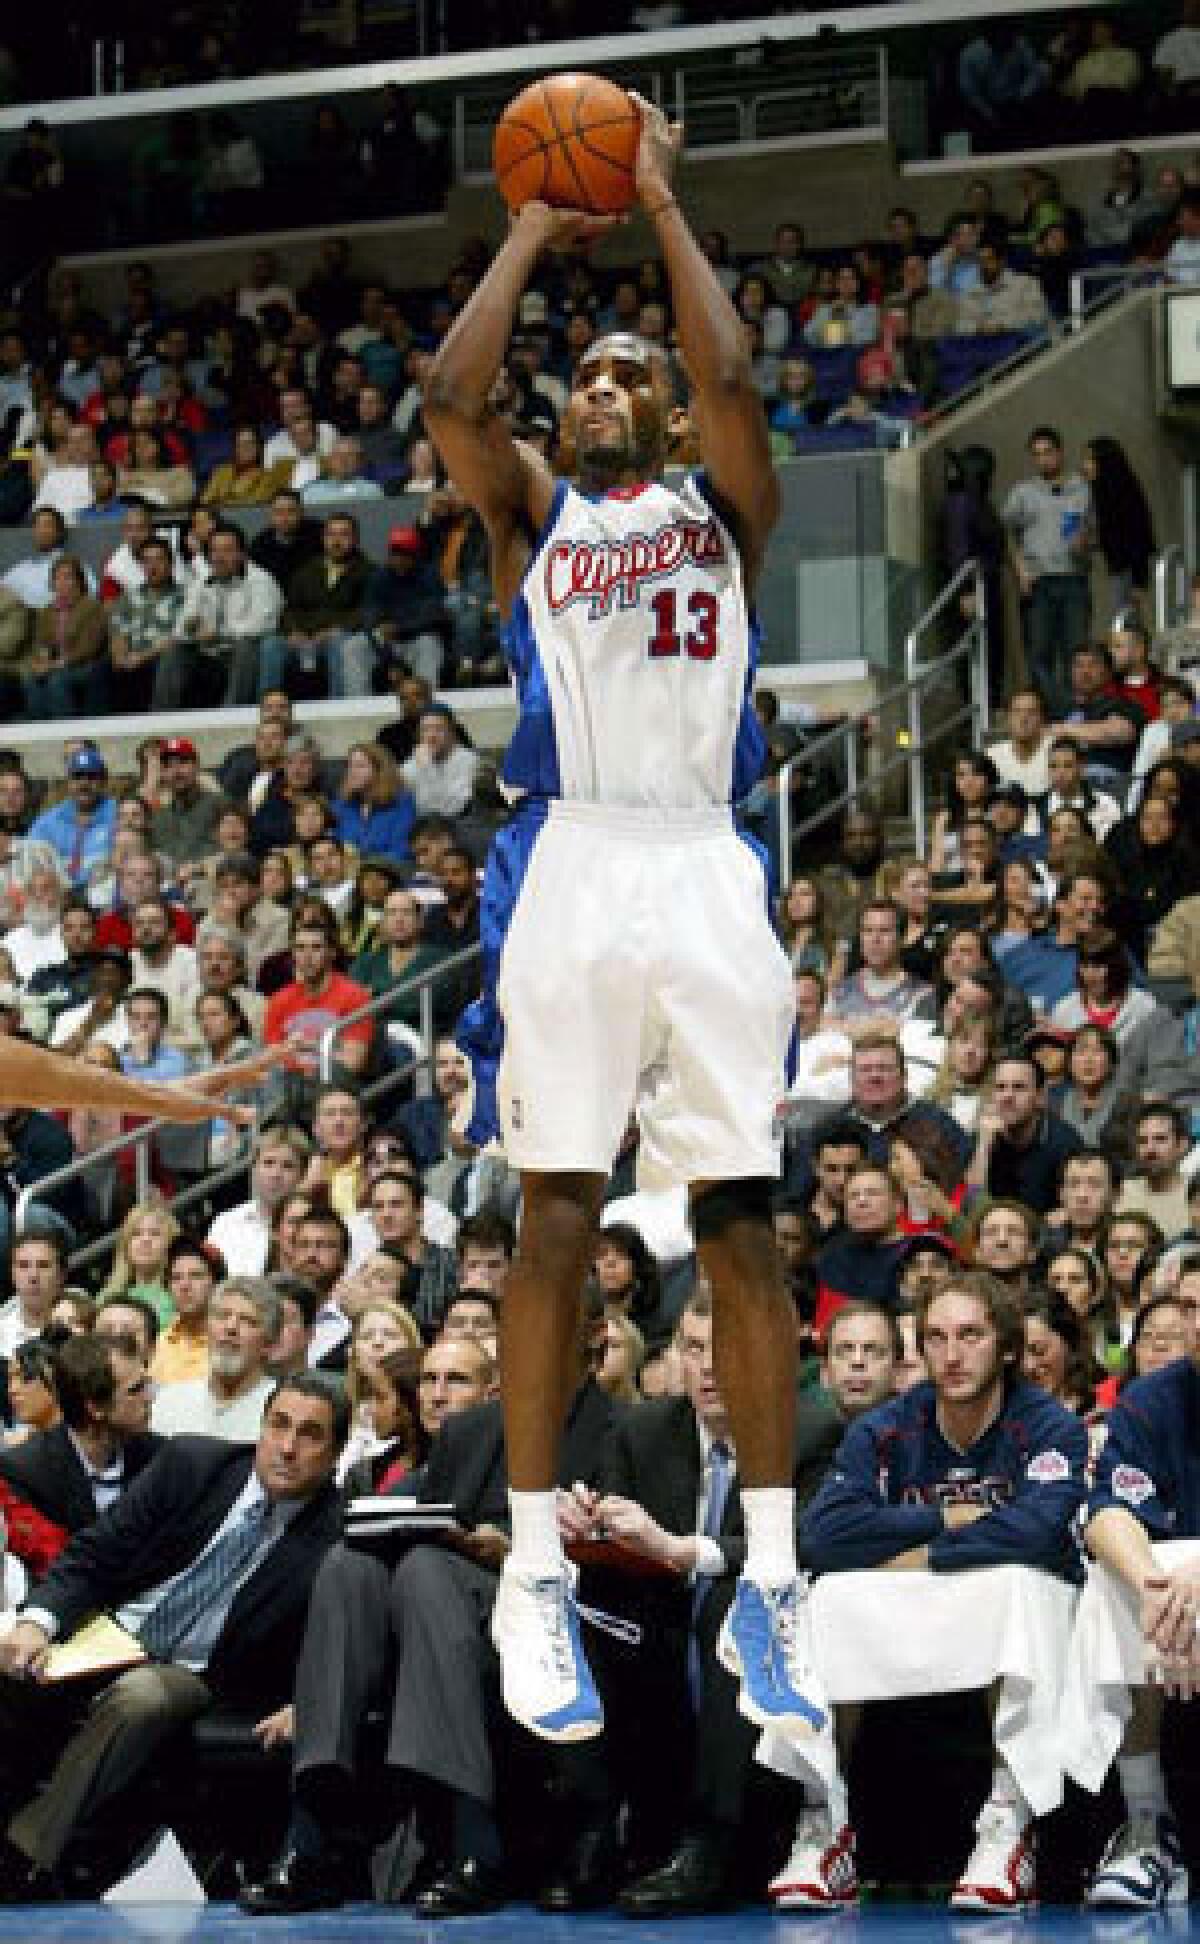 Quinton Ross with the Clippers in 2006.